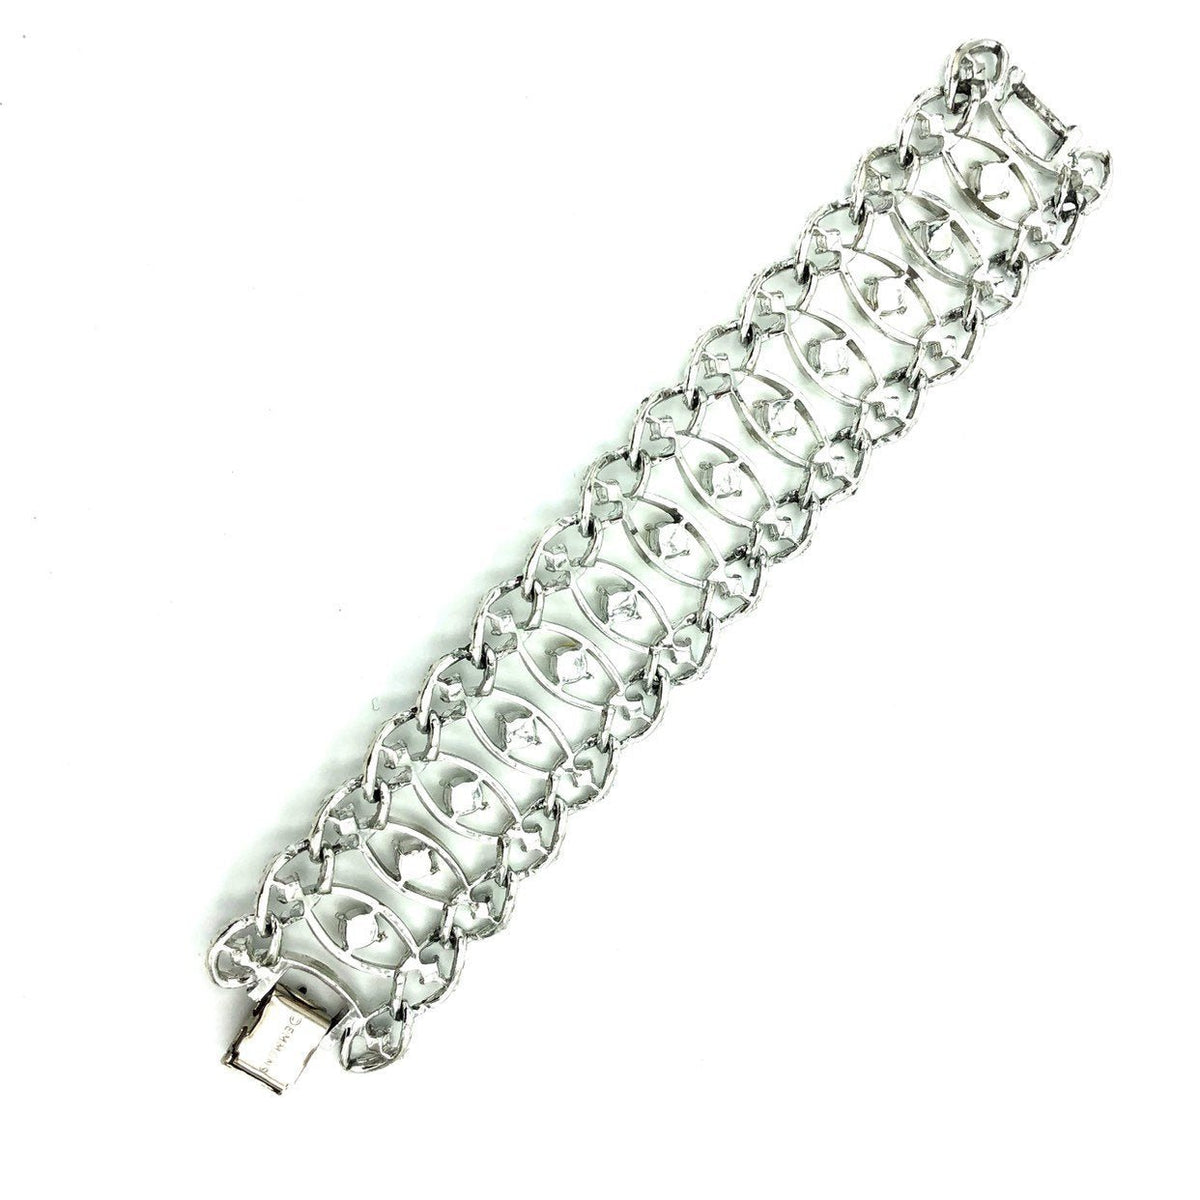 Wide Silver Emmons Chain Link Pearl Rhinestone Bracelet - 24 Wishes Vintage Jewelry